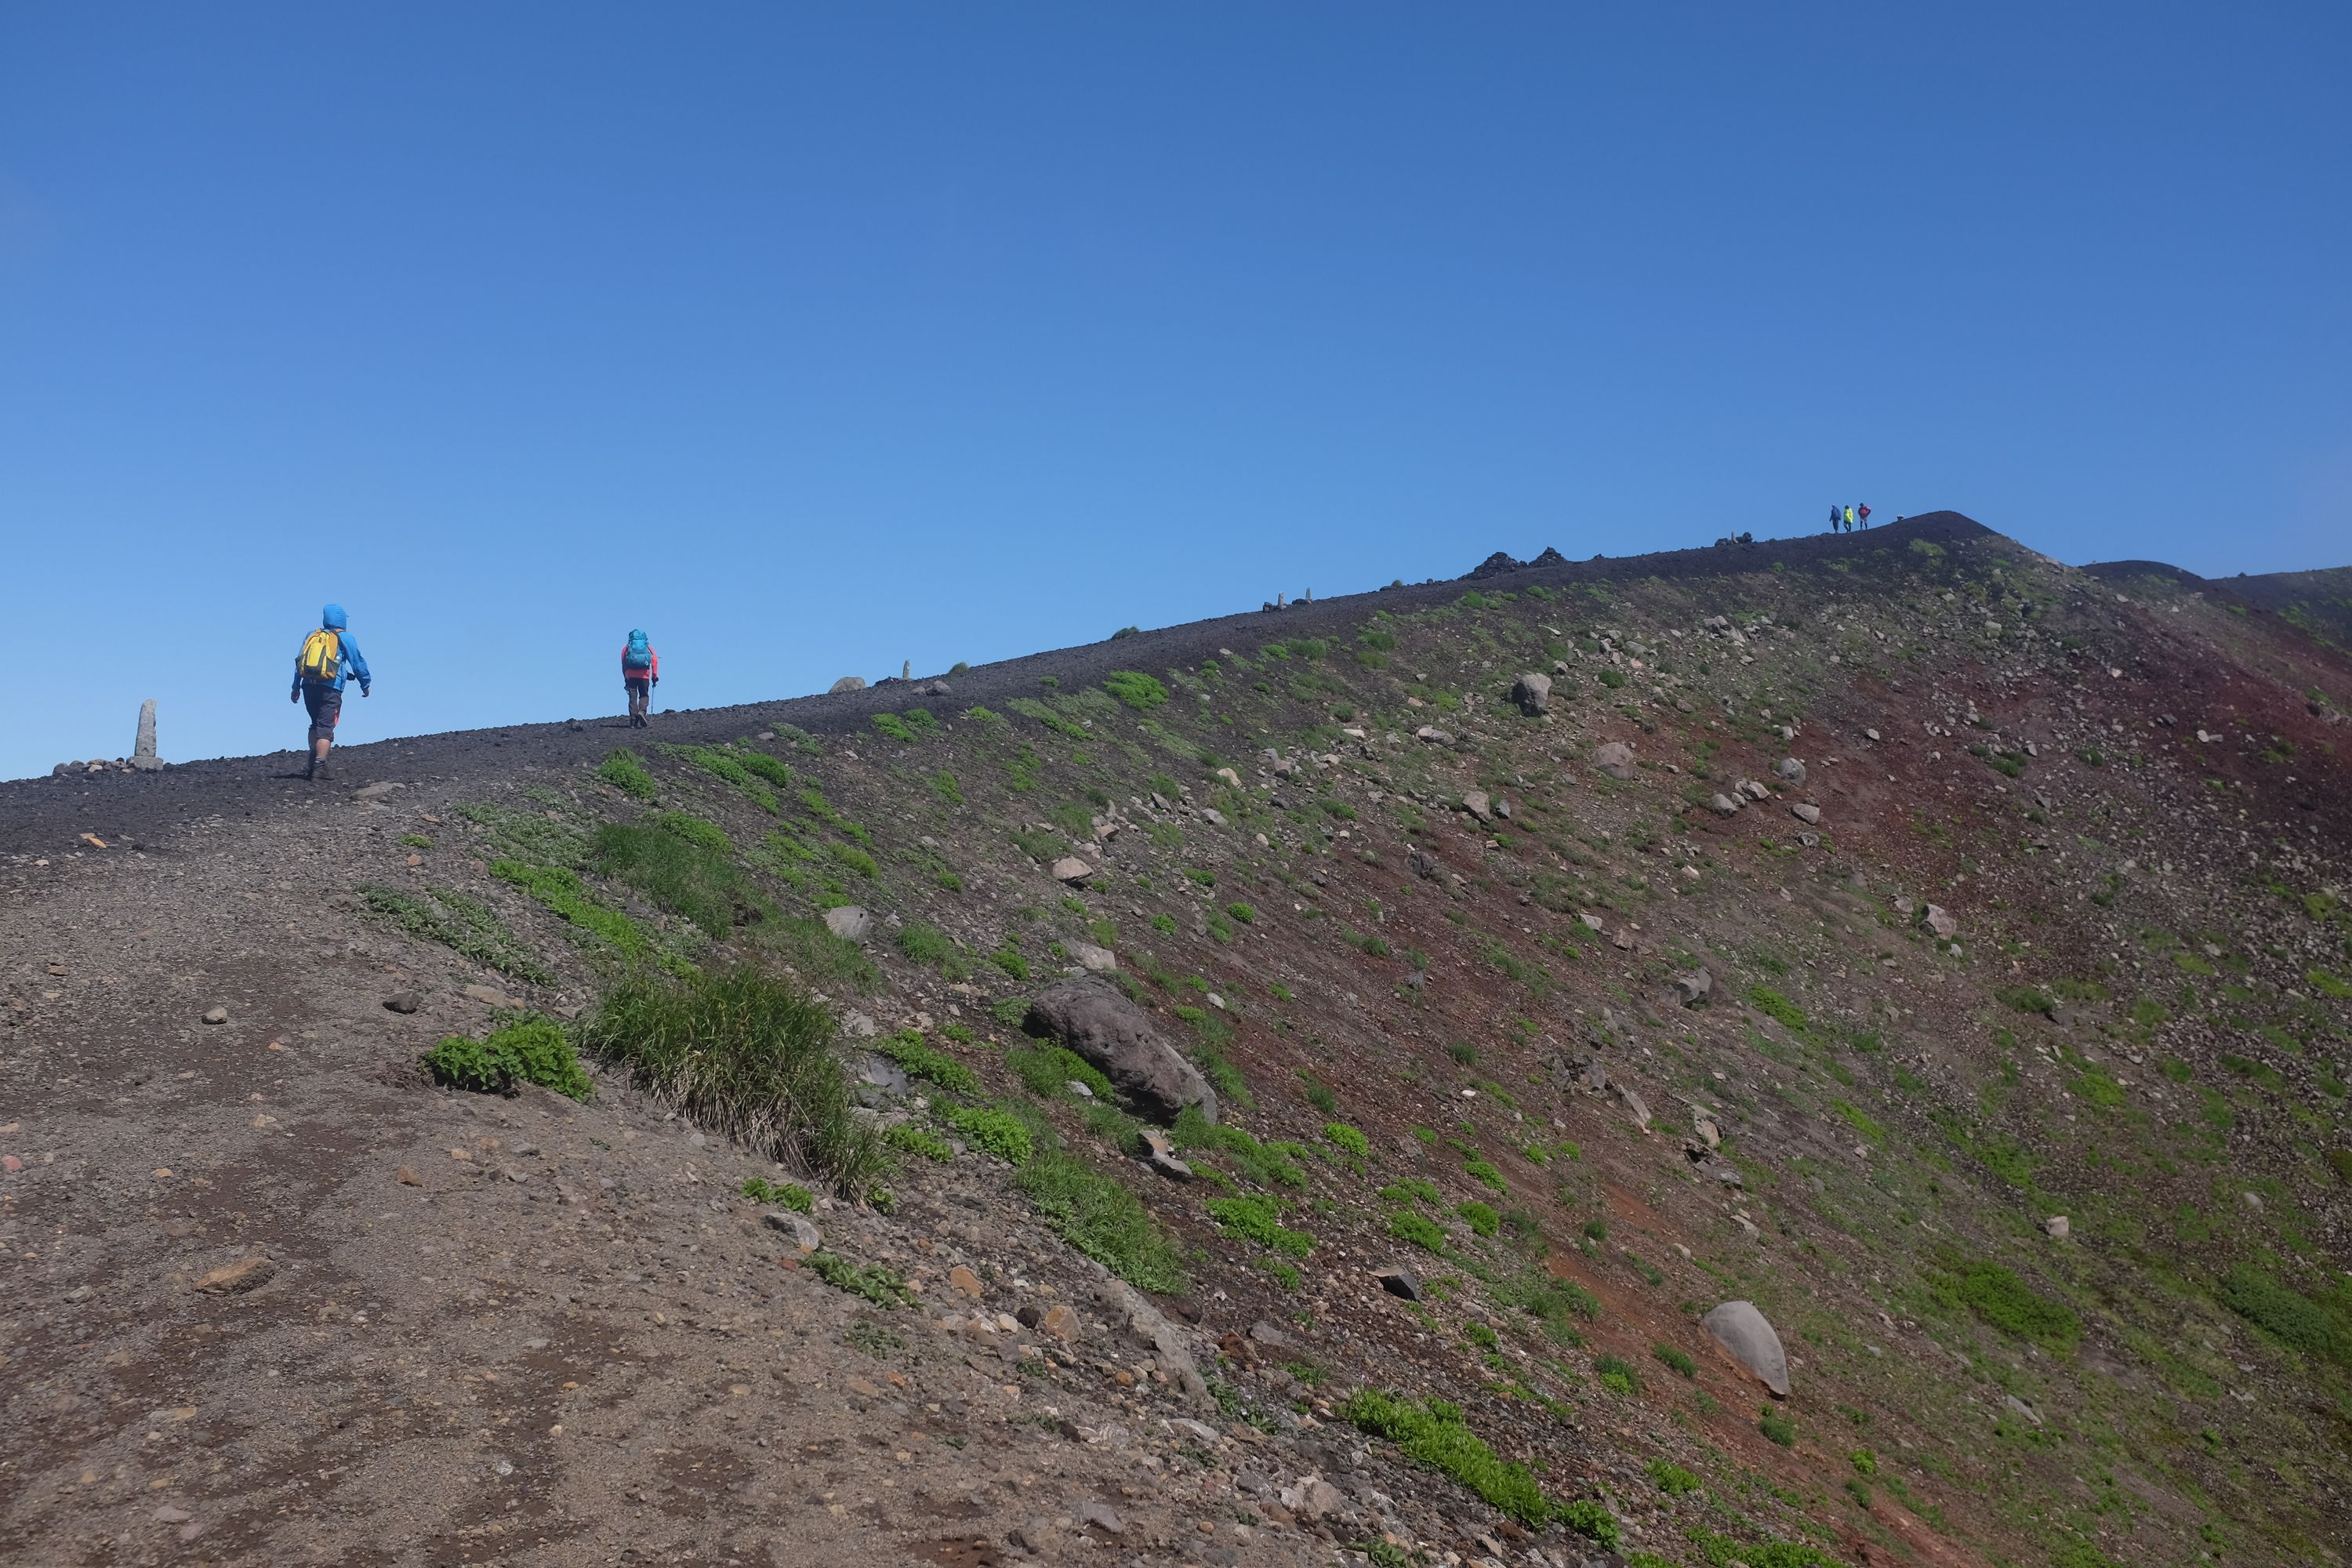 A couple of climbers walk on the rim of a volcanic crater.